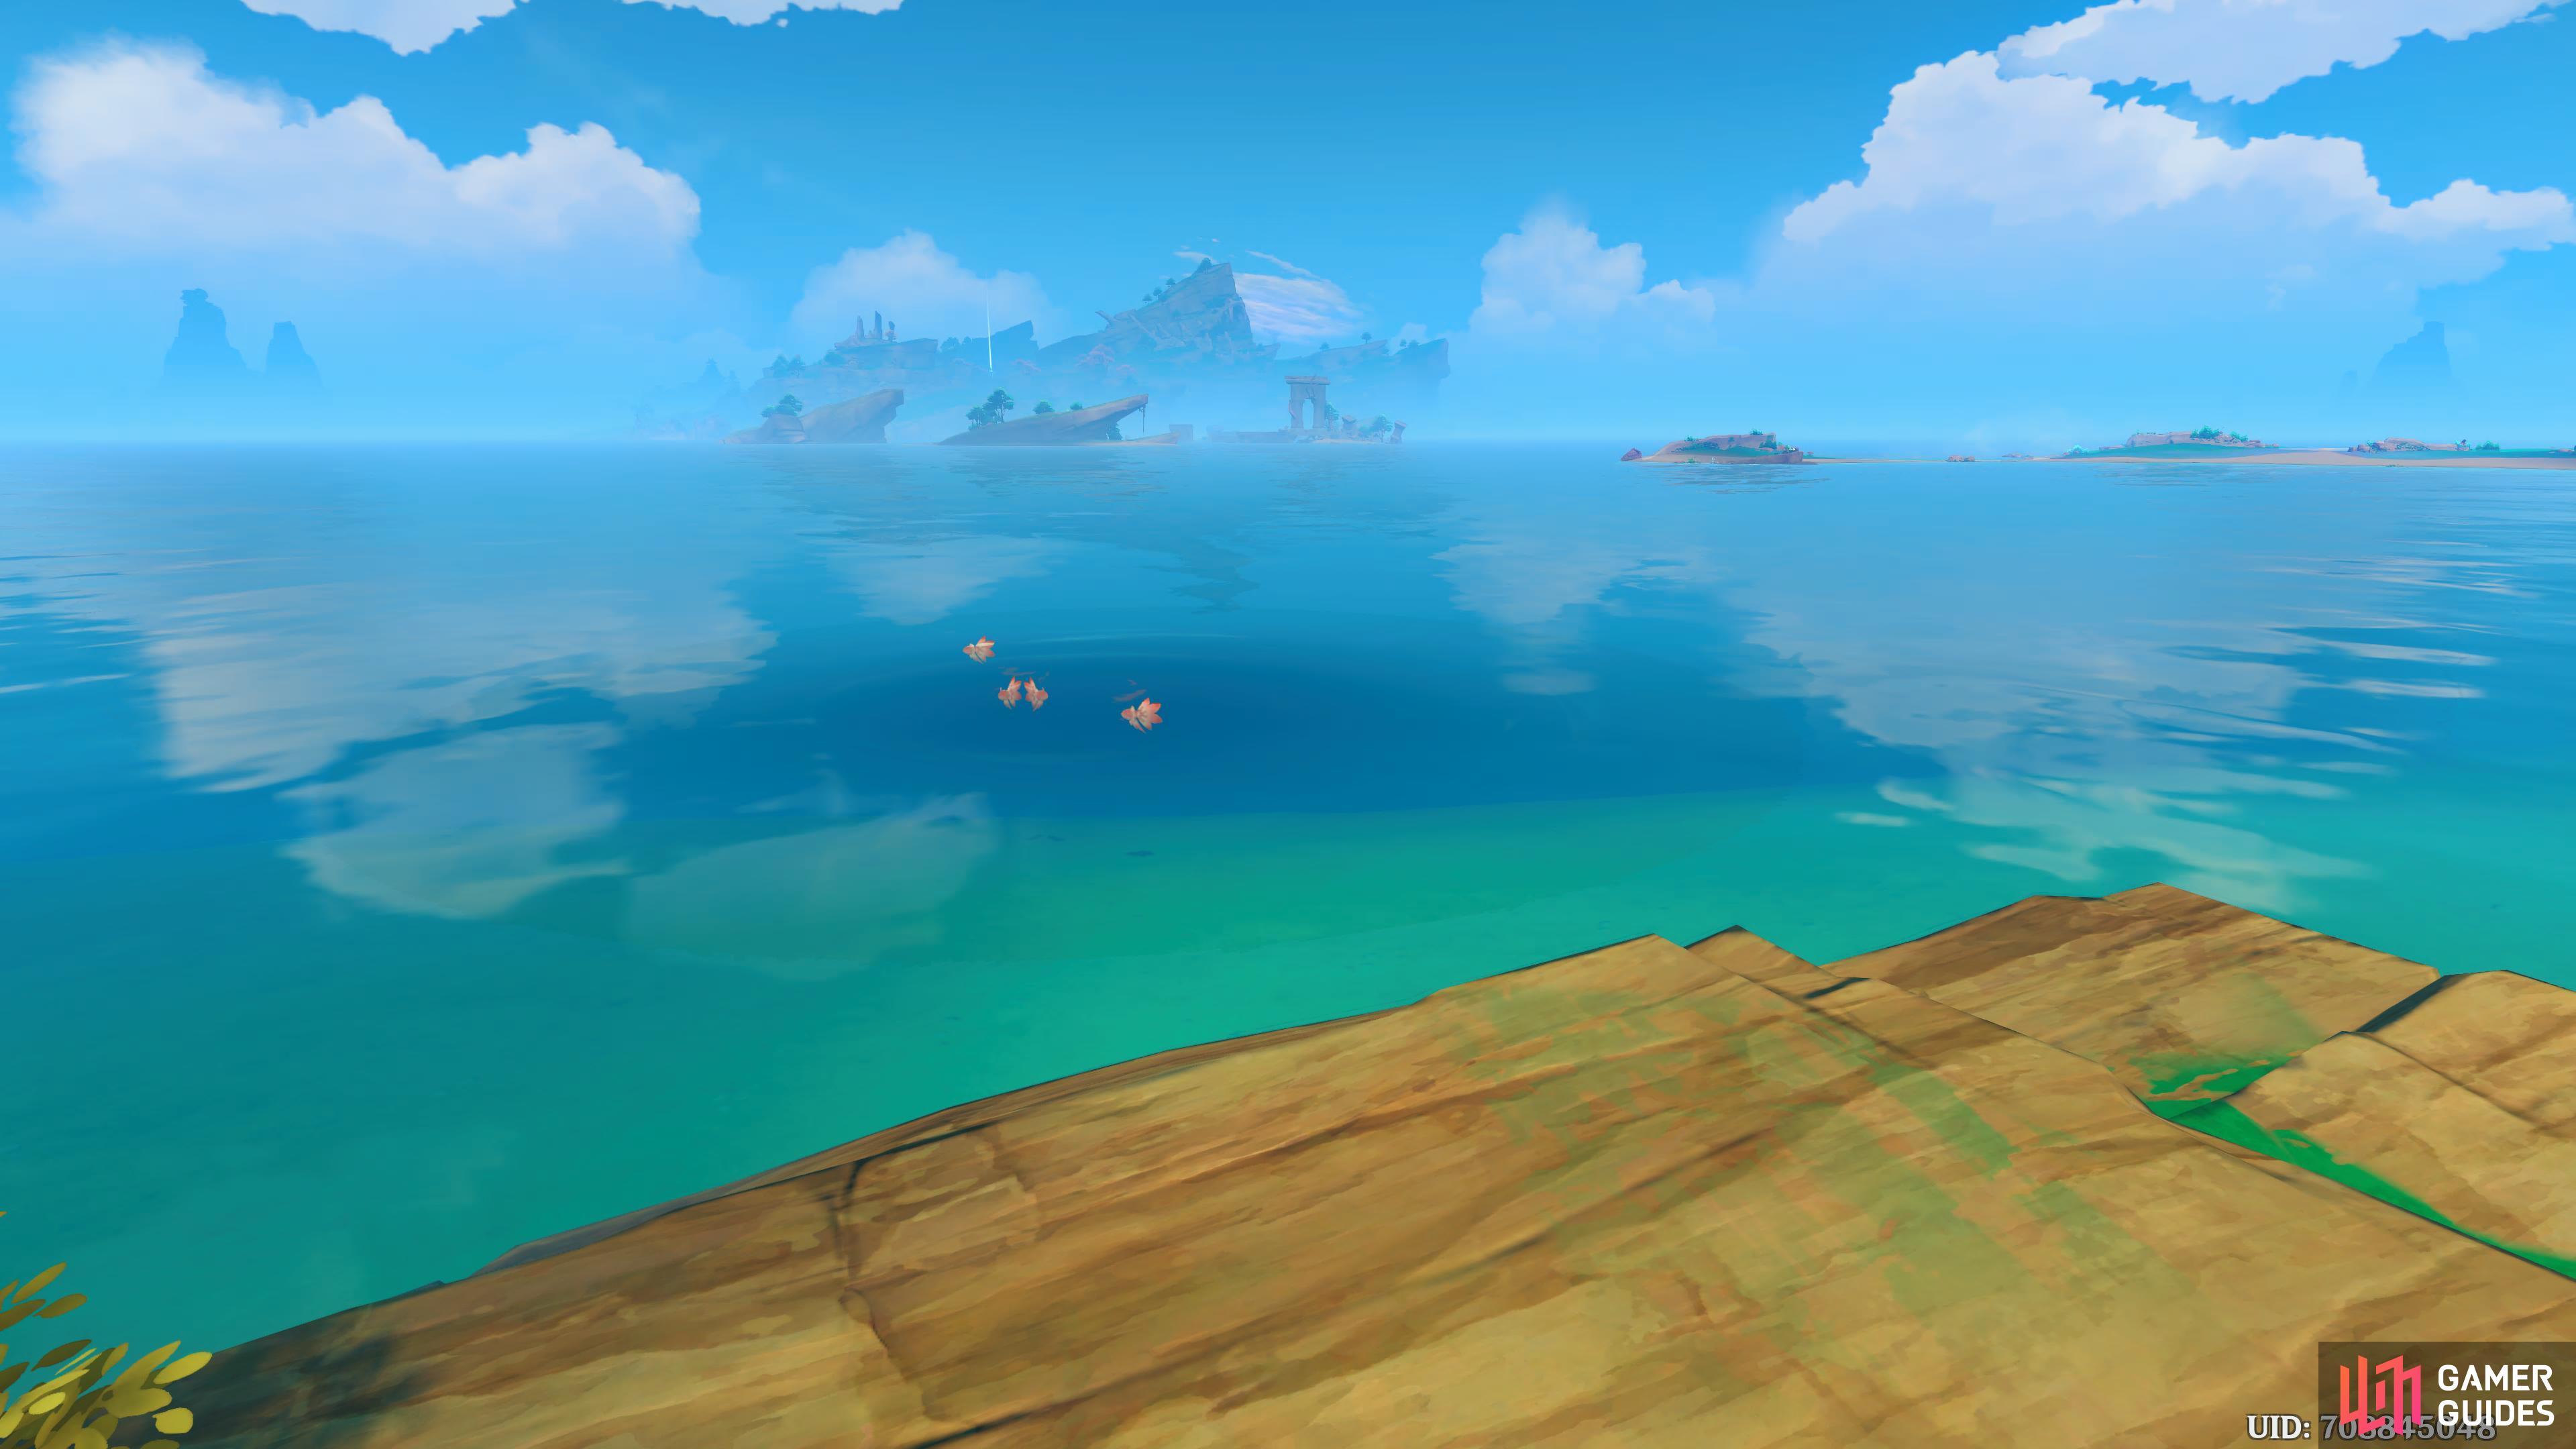 Here's a visual of the Suigetsu Pool Fishing Point.